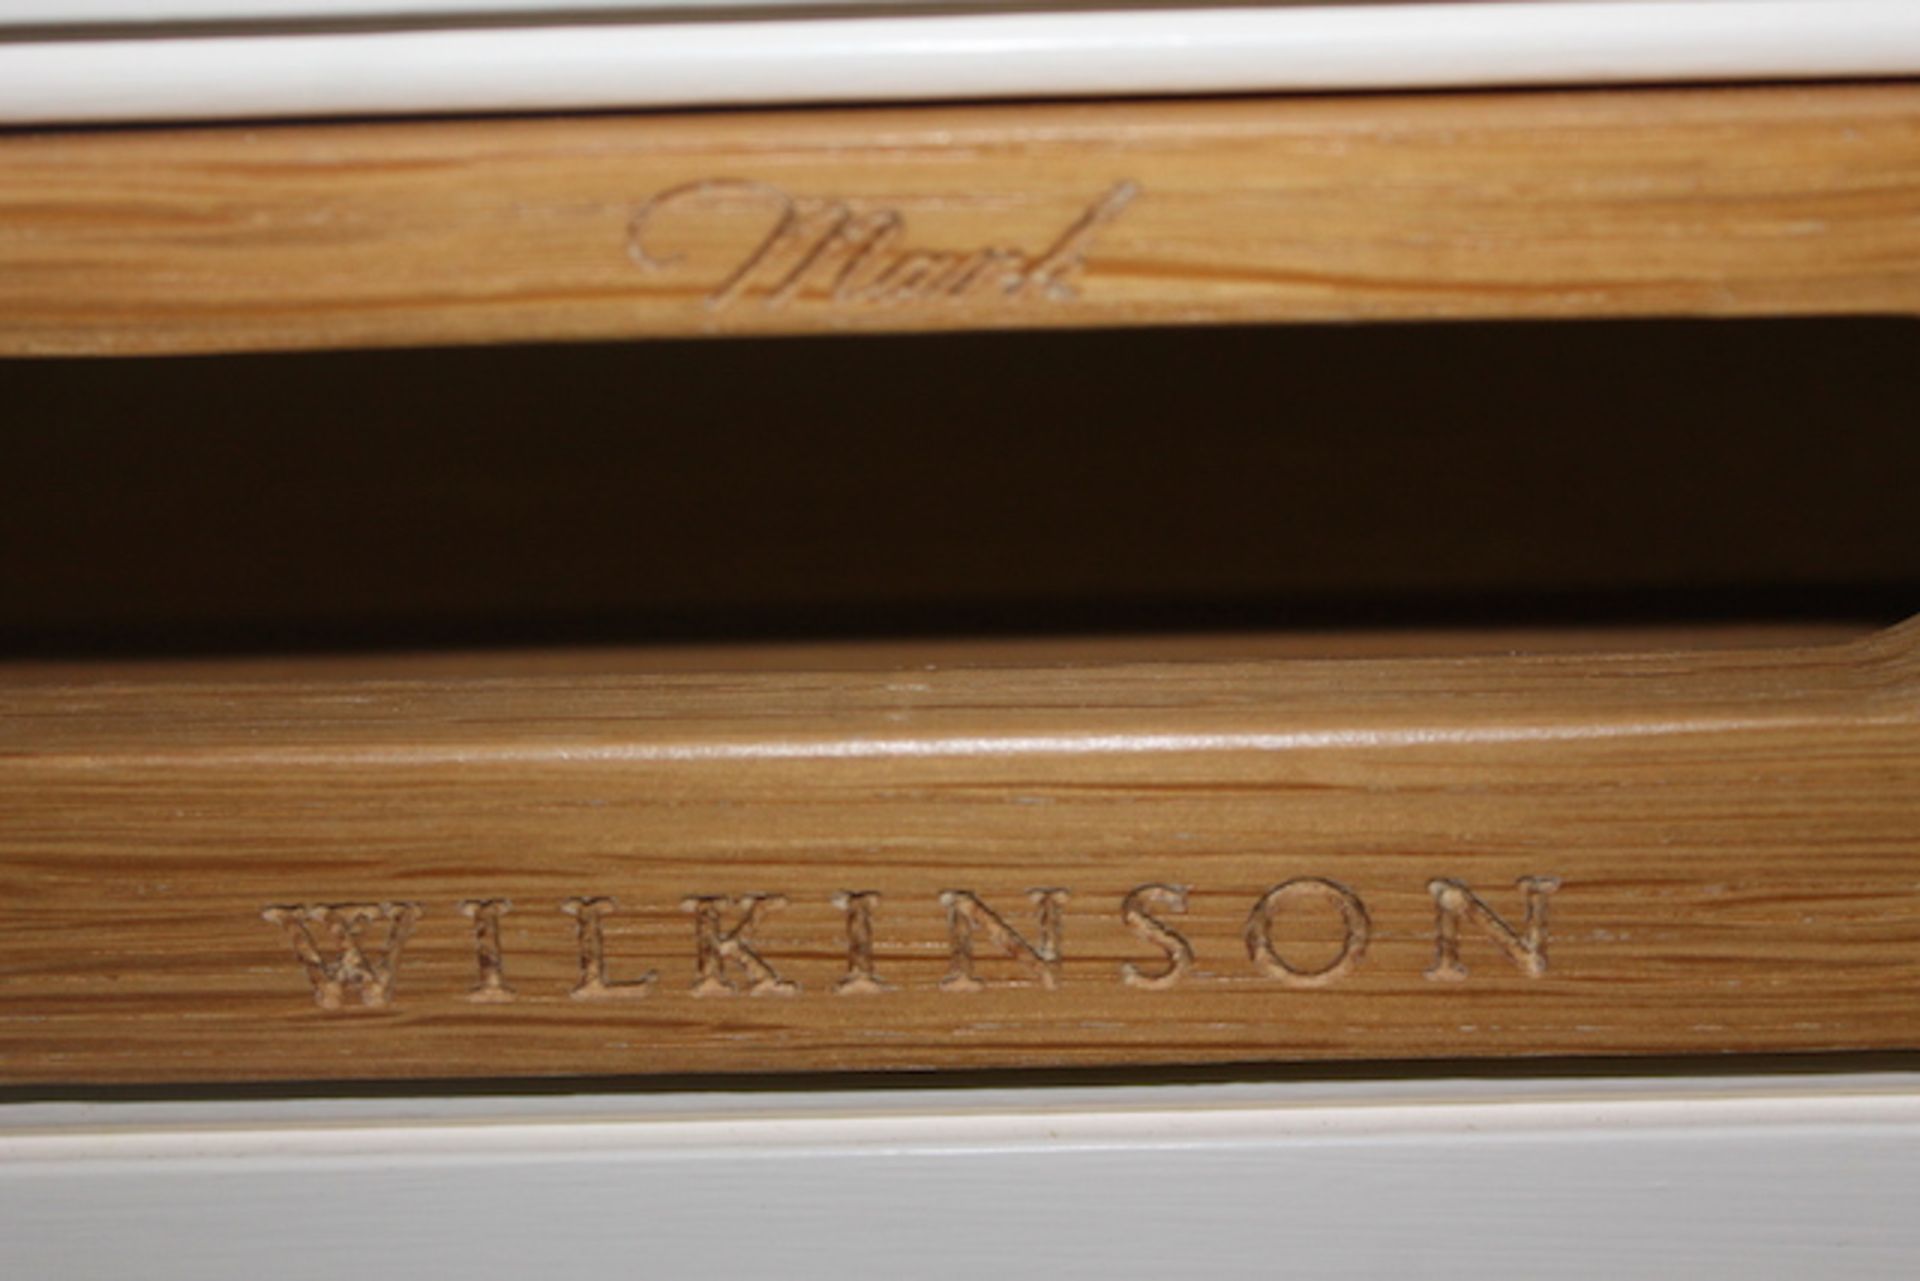 Cook Ivory and Oak Kitchen - "Matk Wilkinson" - Image 3 of 19